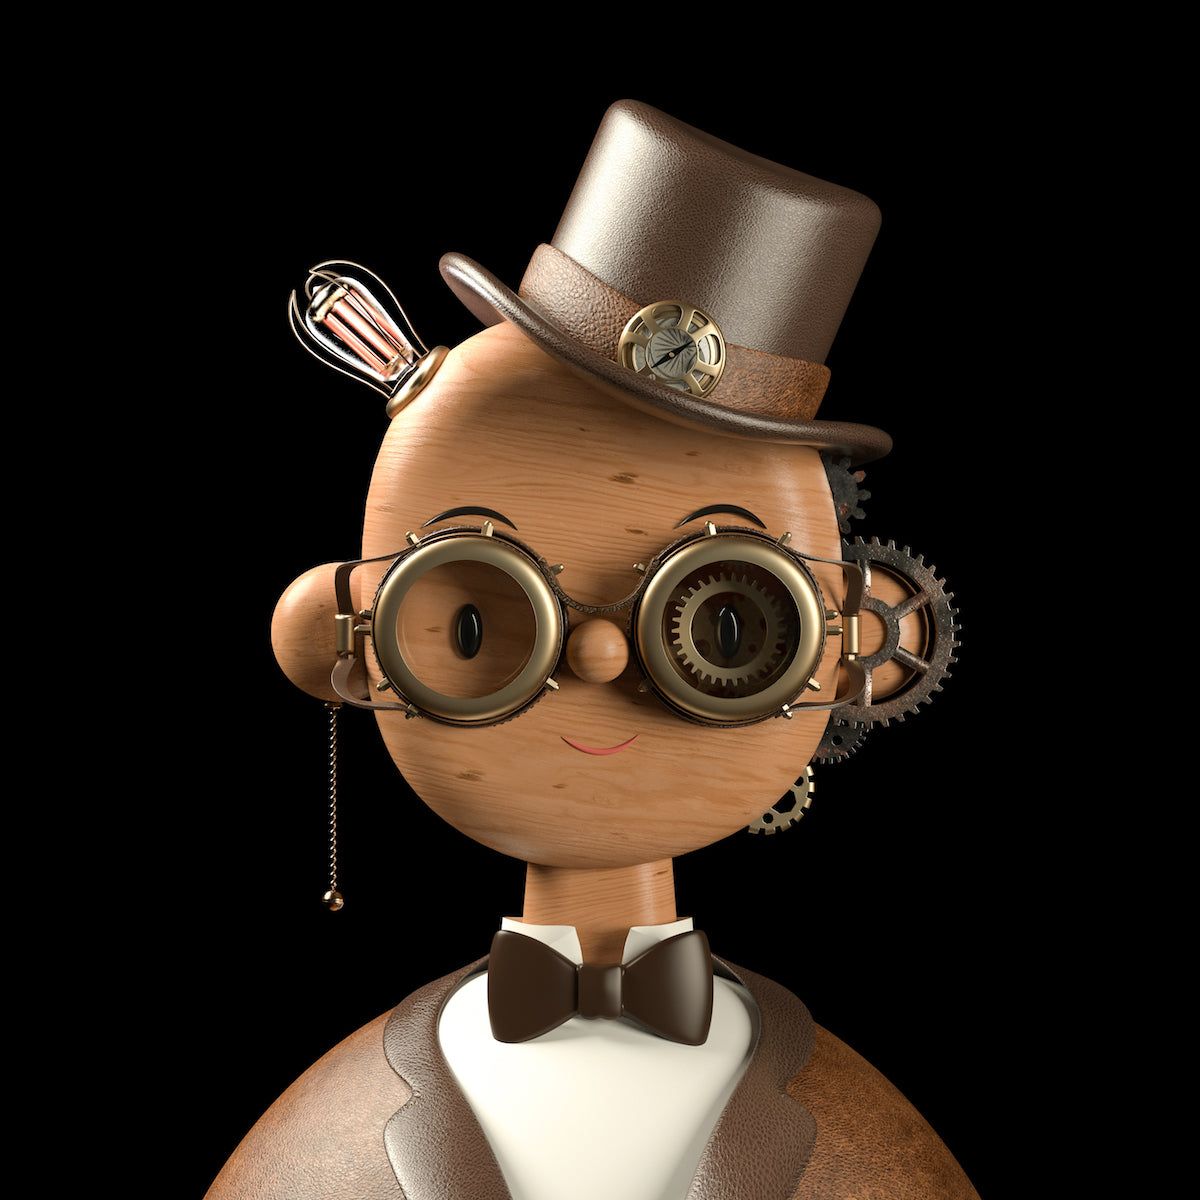 Steampunk Toy Face by Amrit Pal Singh